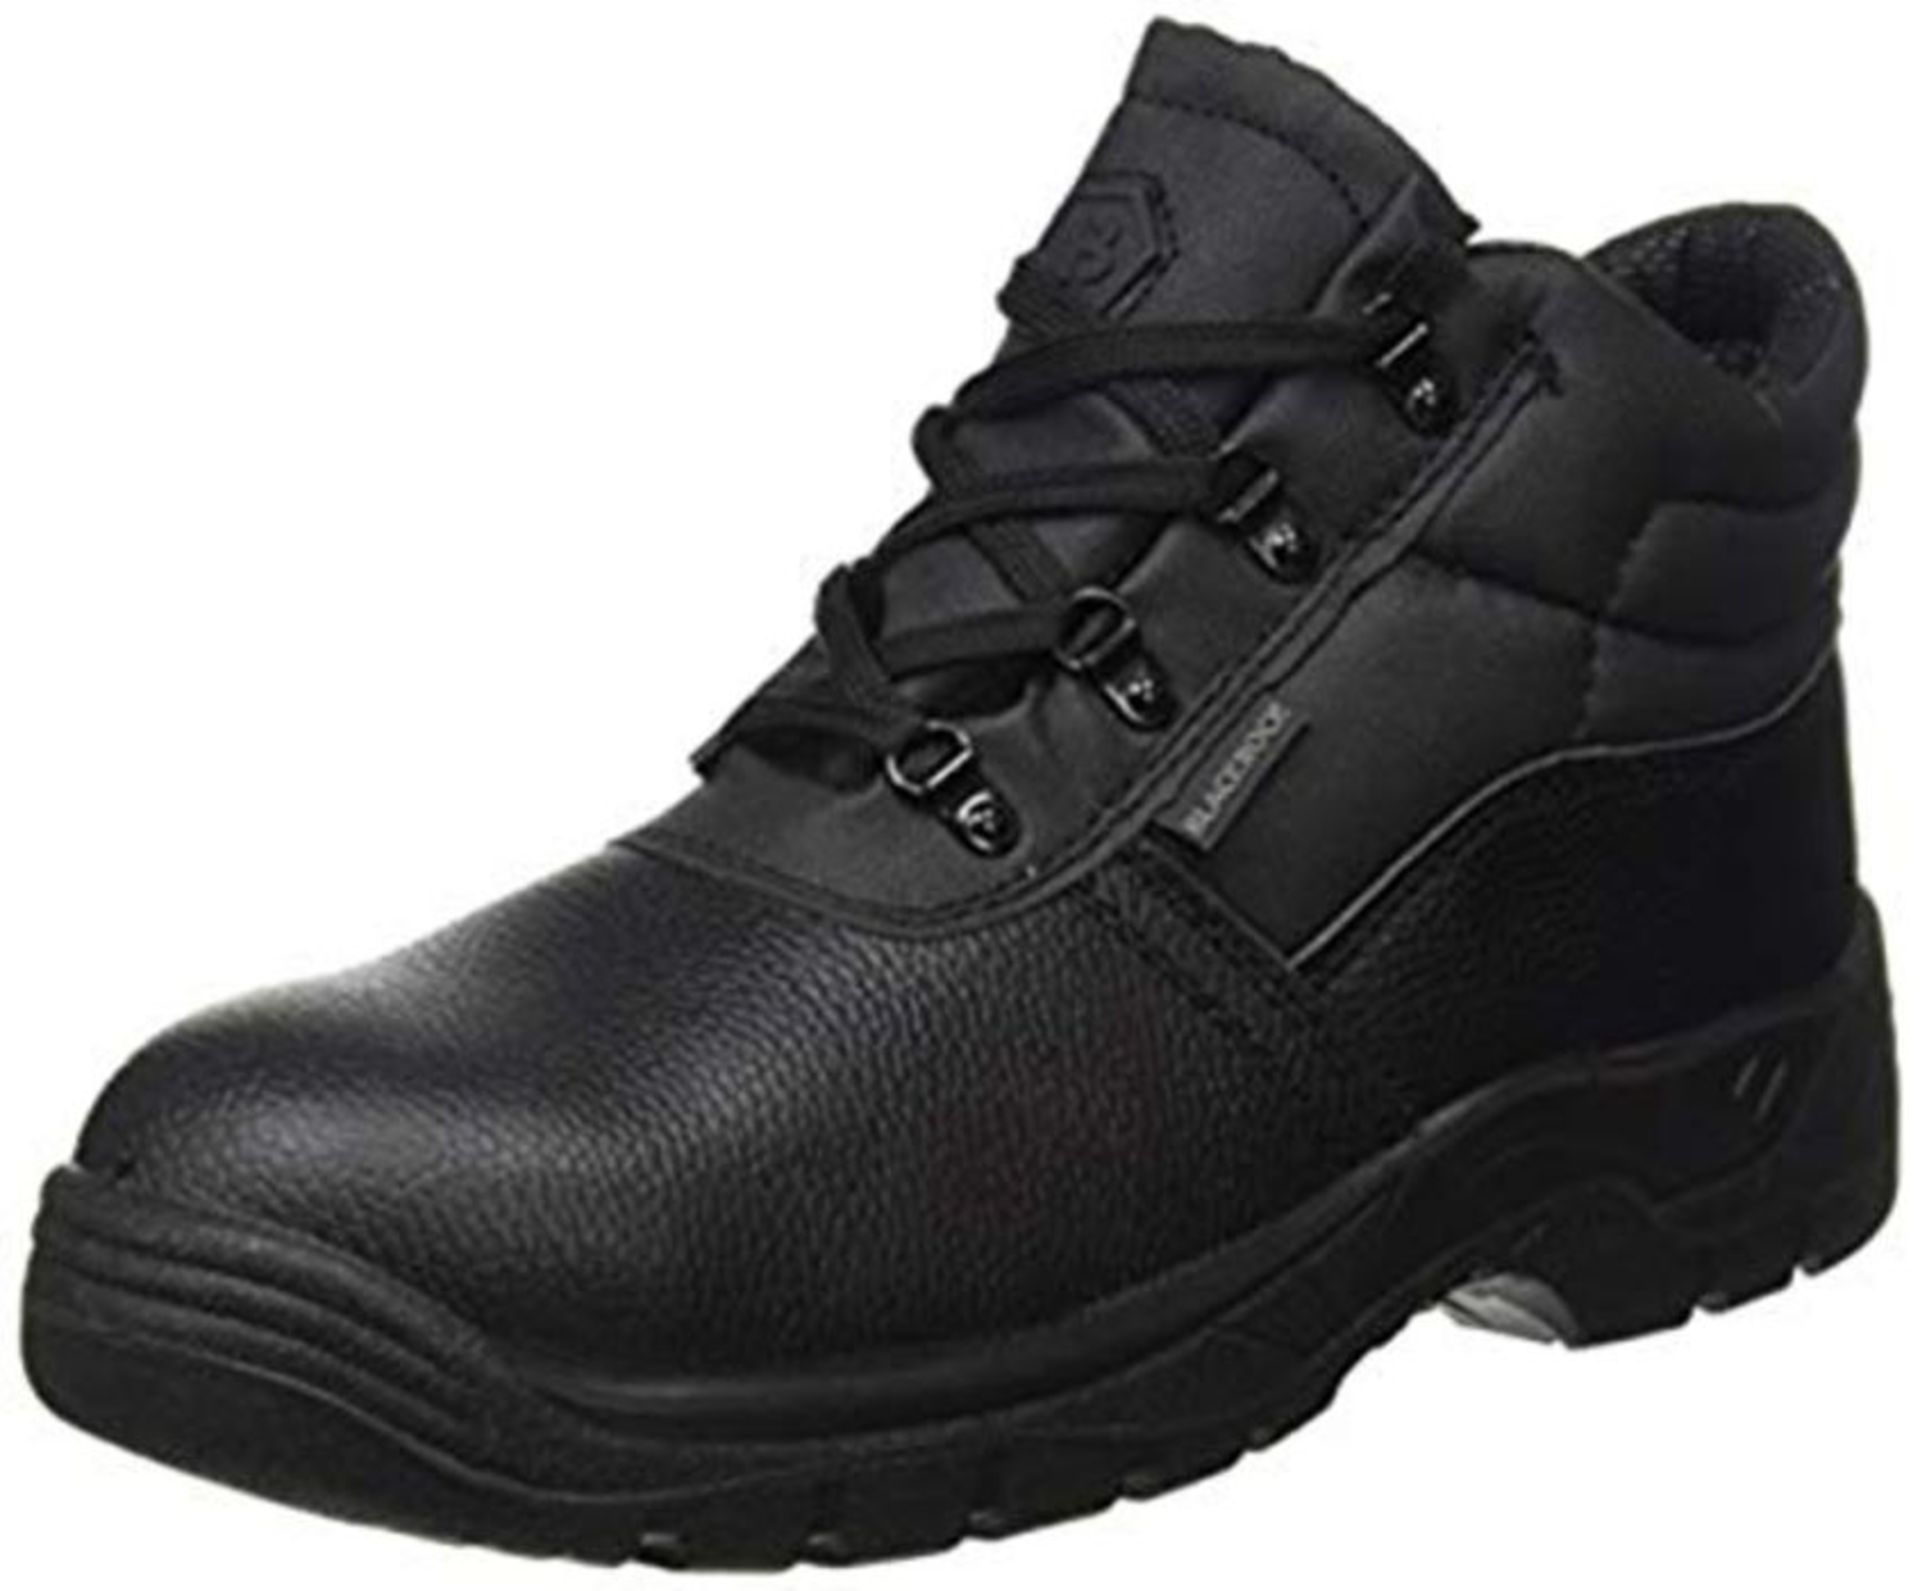 Blackrock Black Leather Work Safety Chukka Boots With Steel Toe Caps And Midsole (UK 9